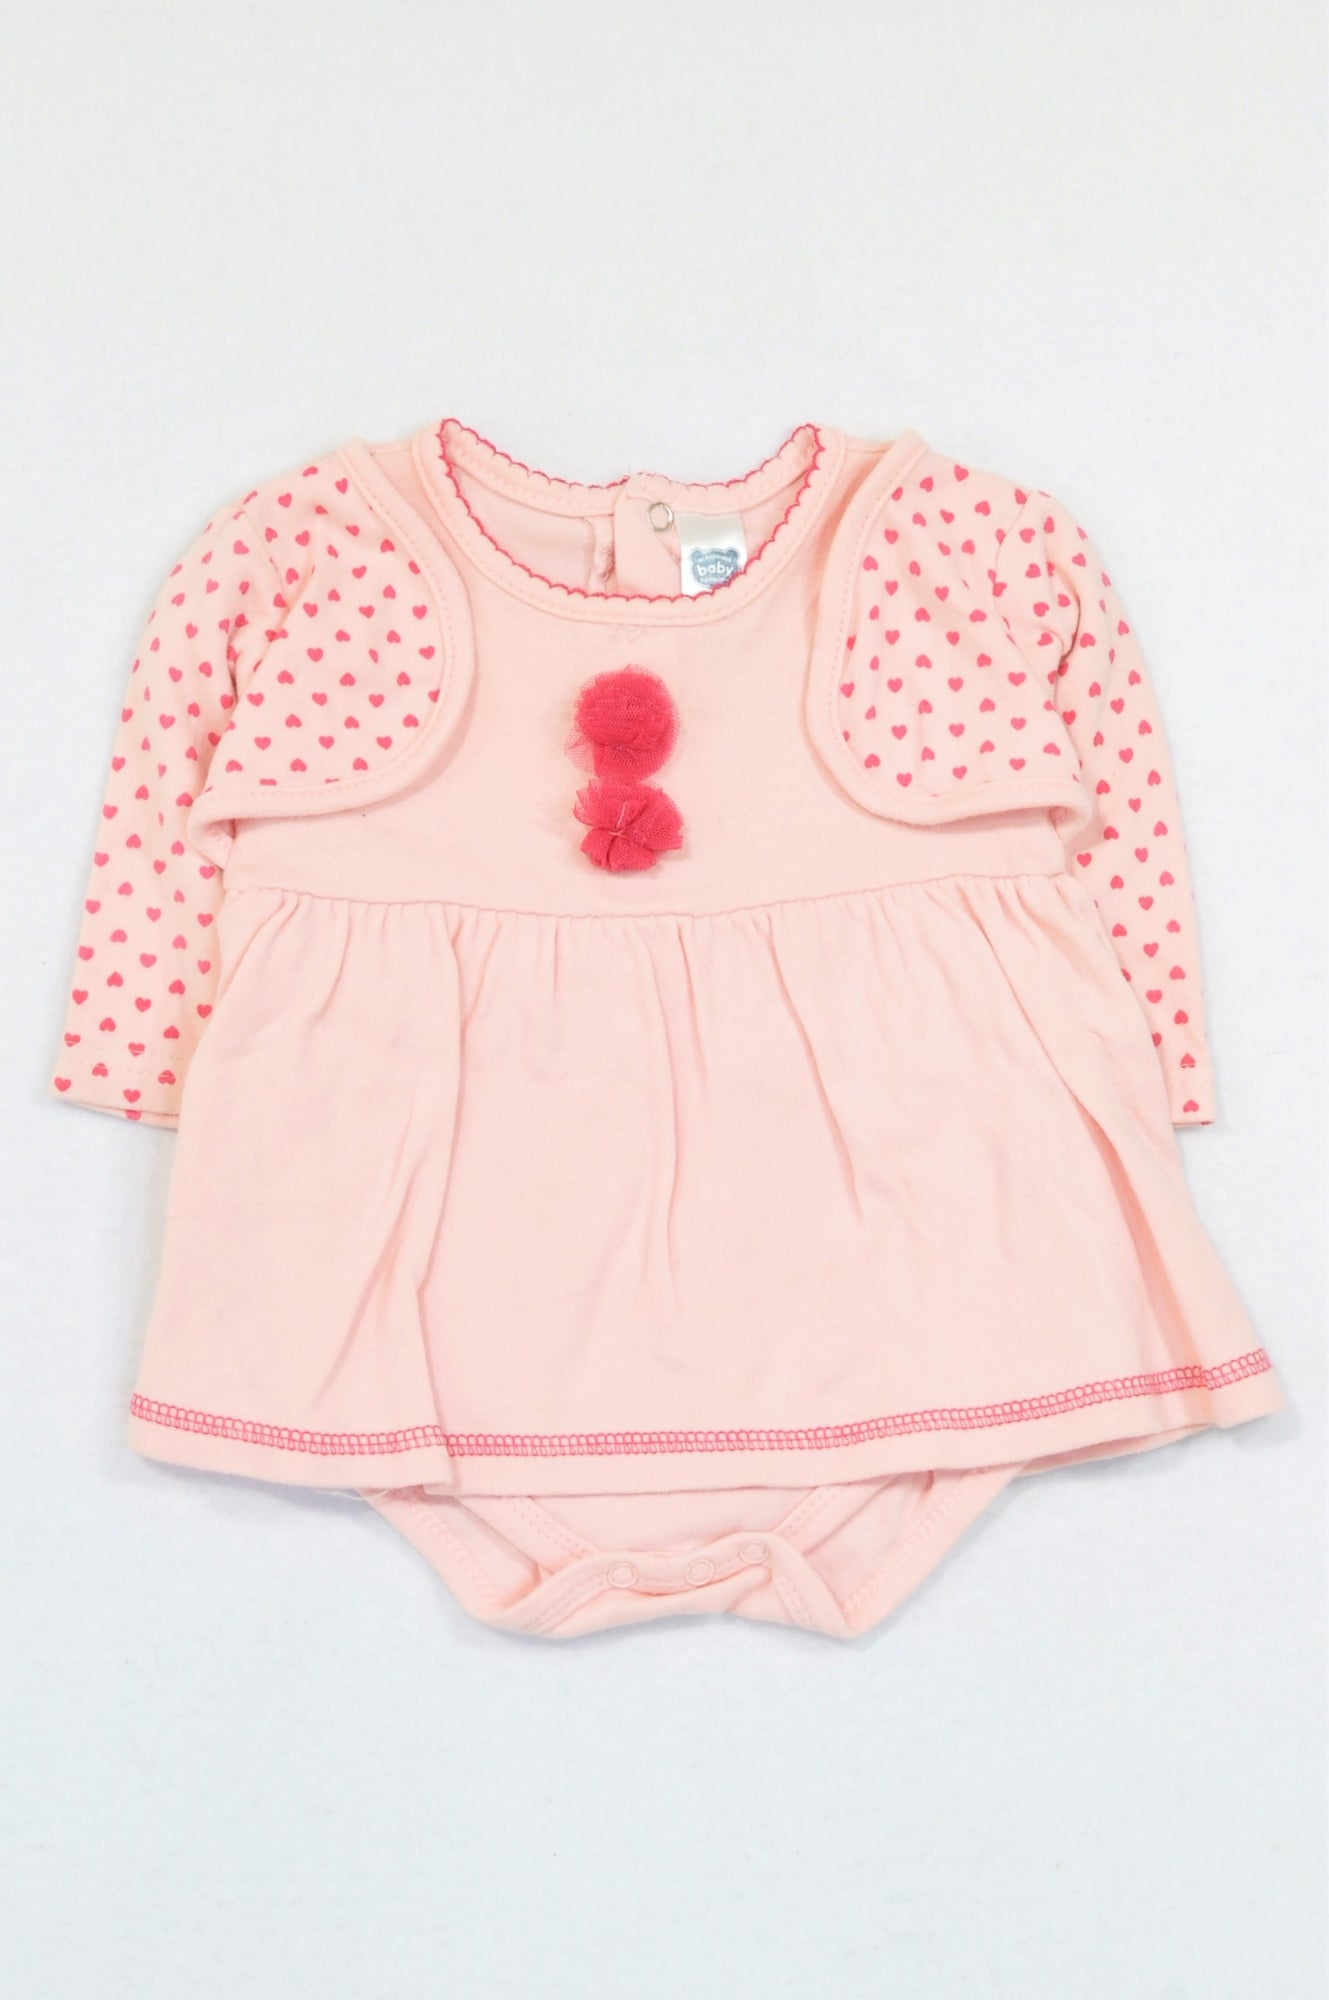 ackermans baby girl summer clothes